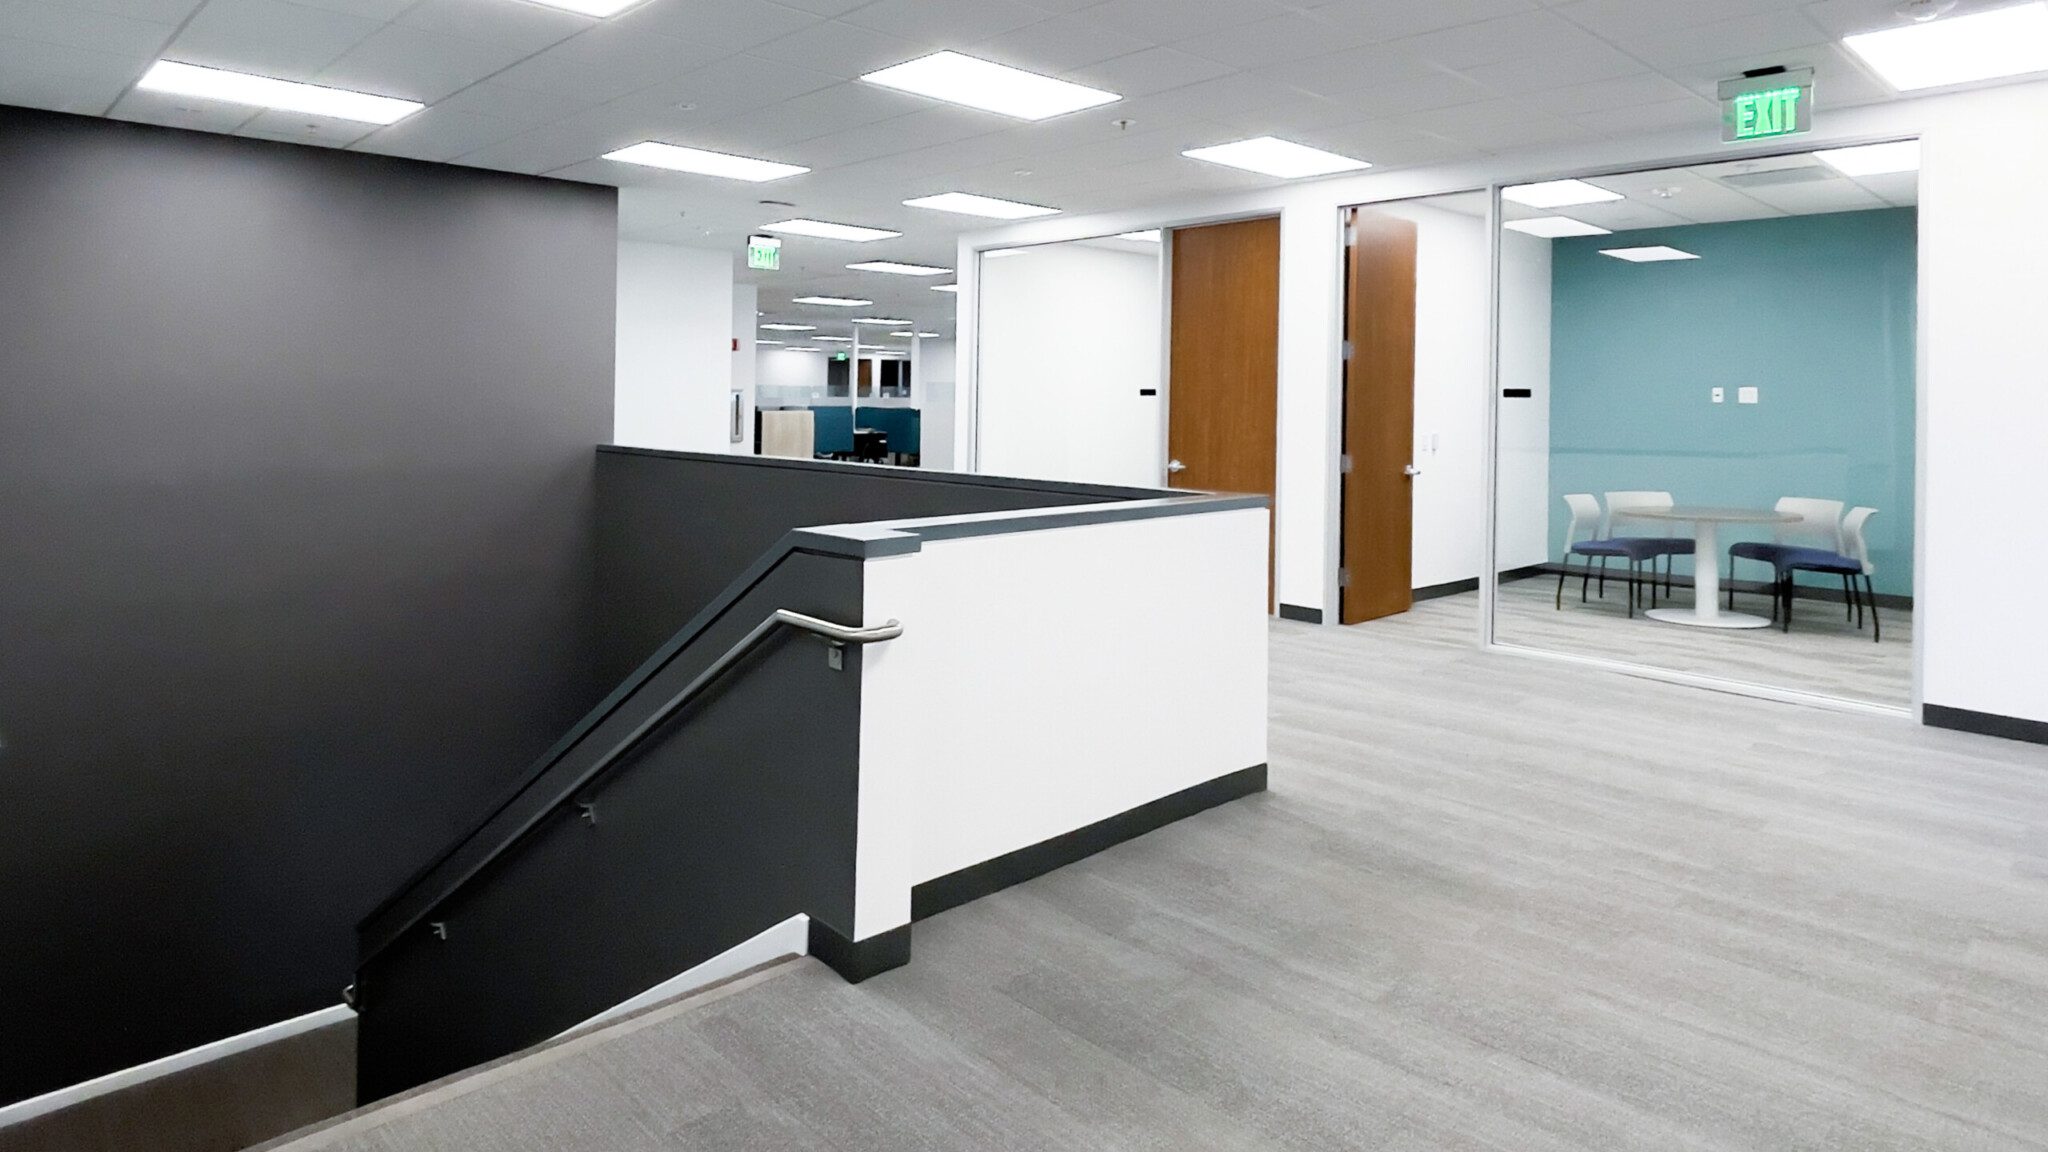 Staircase lobby with conference rooms and cubicles visible 